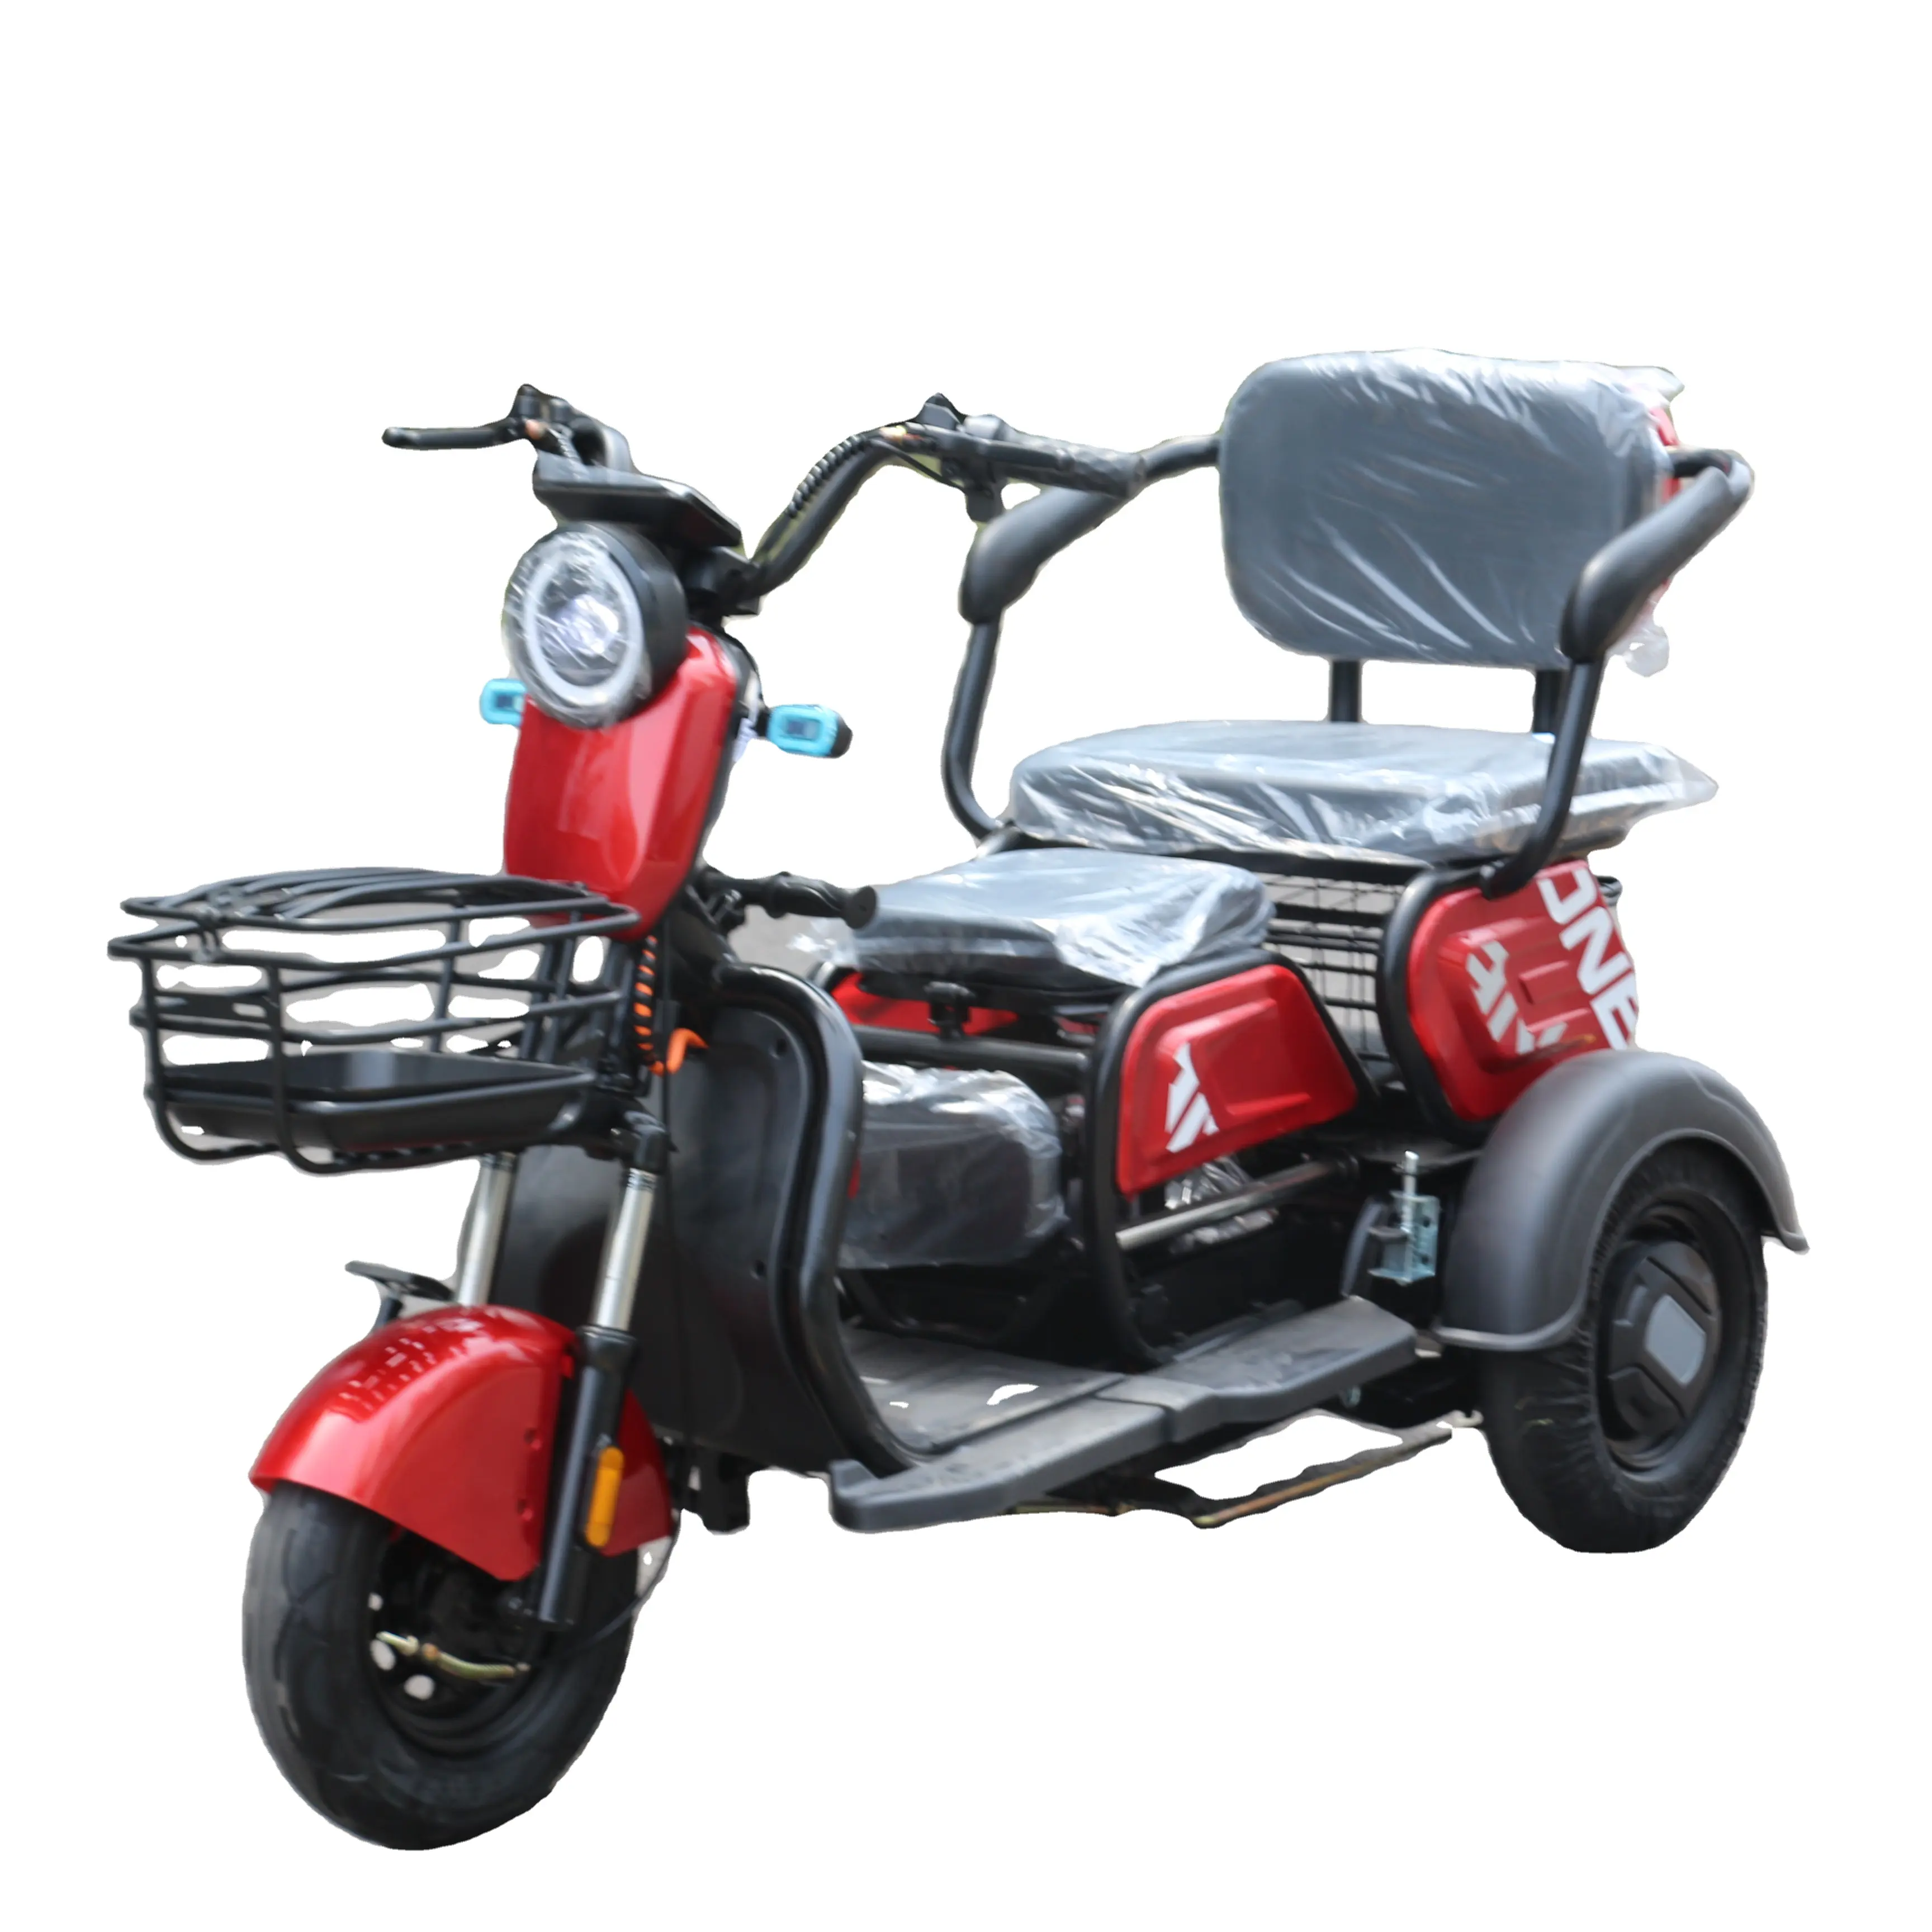 adult cargo Best price electric tricycle transport car mini tricycle 3 wheel tricycle adult Open Body for Passenger